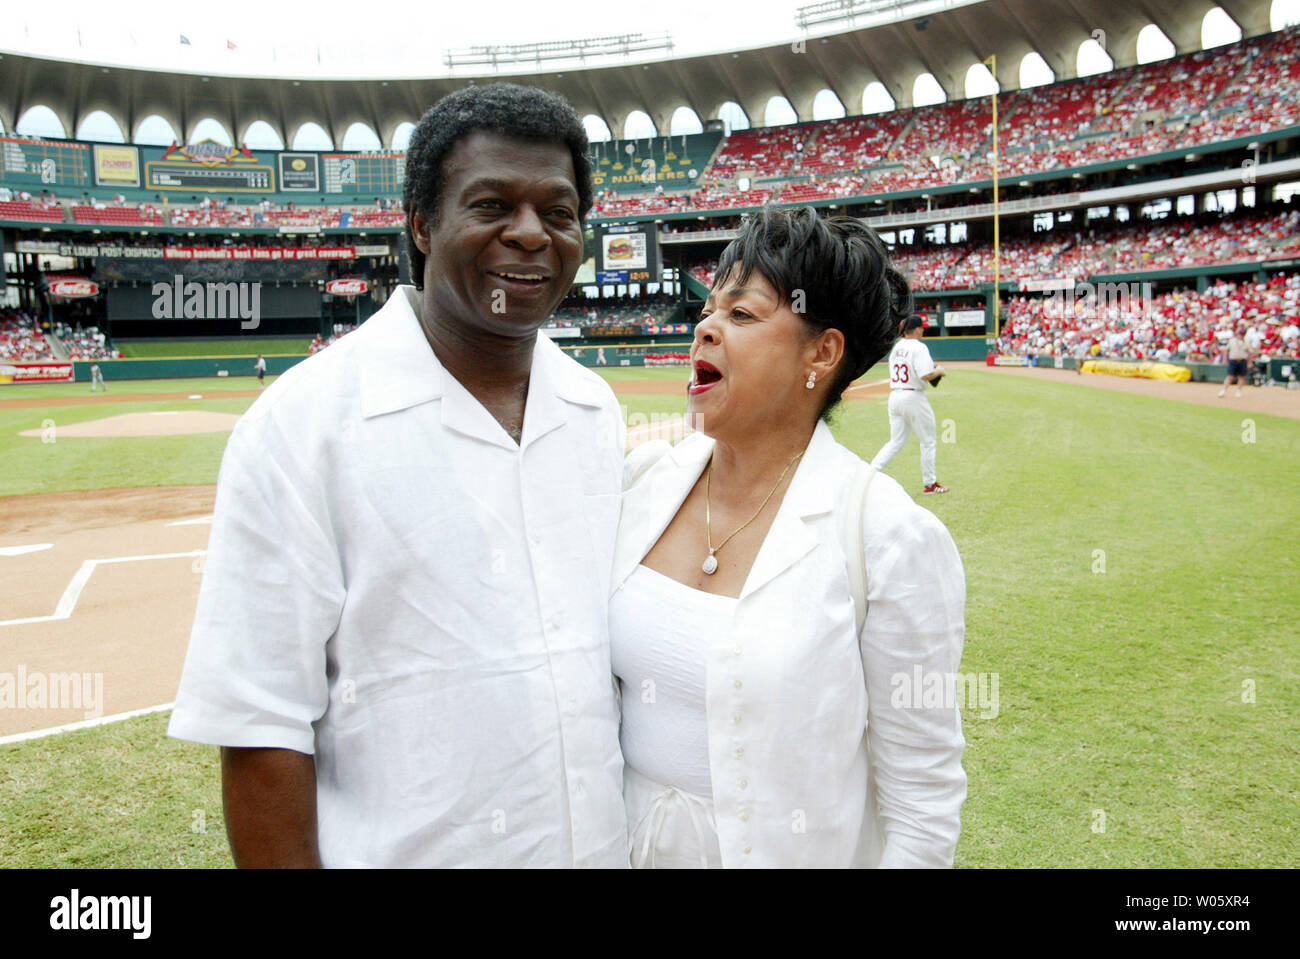 Baseball Hall of Famer and former St. Louis Cardinals great Lou Brock and  his wife Jackie talk to fans on the field before a game between the  Cardinals and the Boston Red